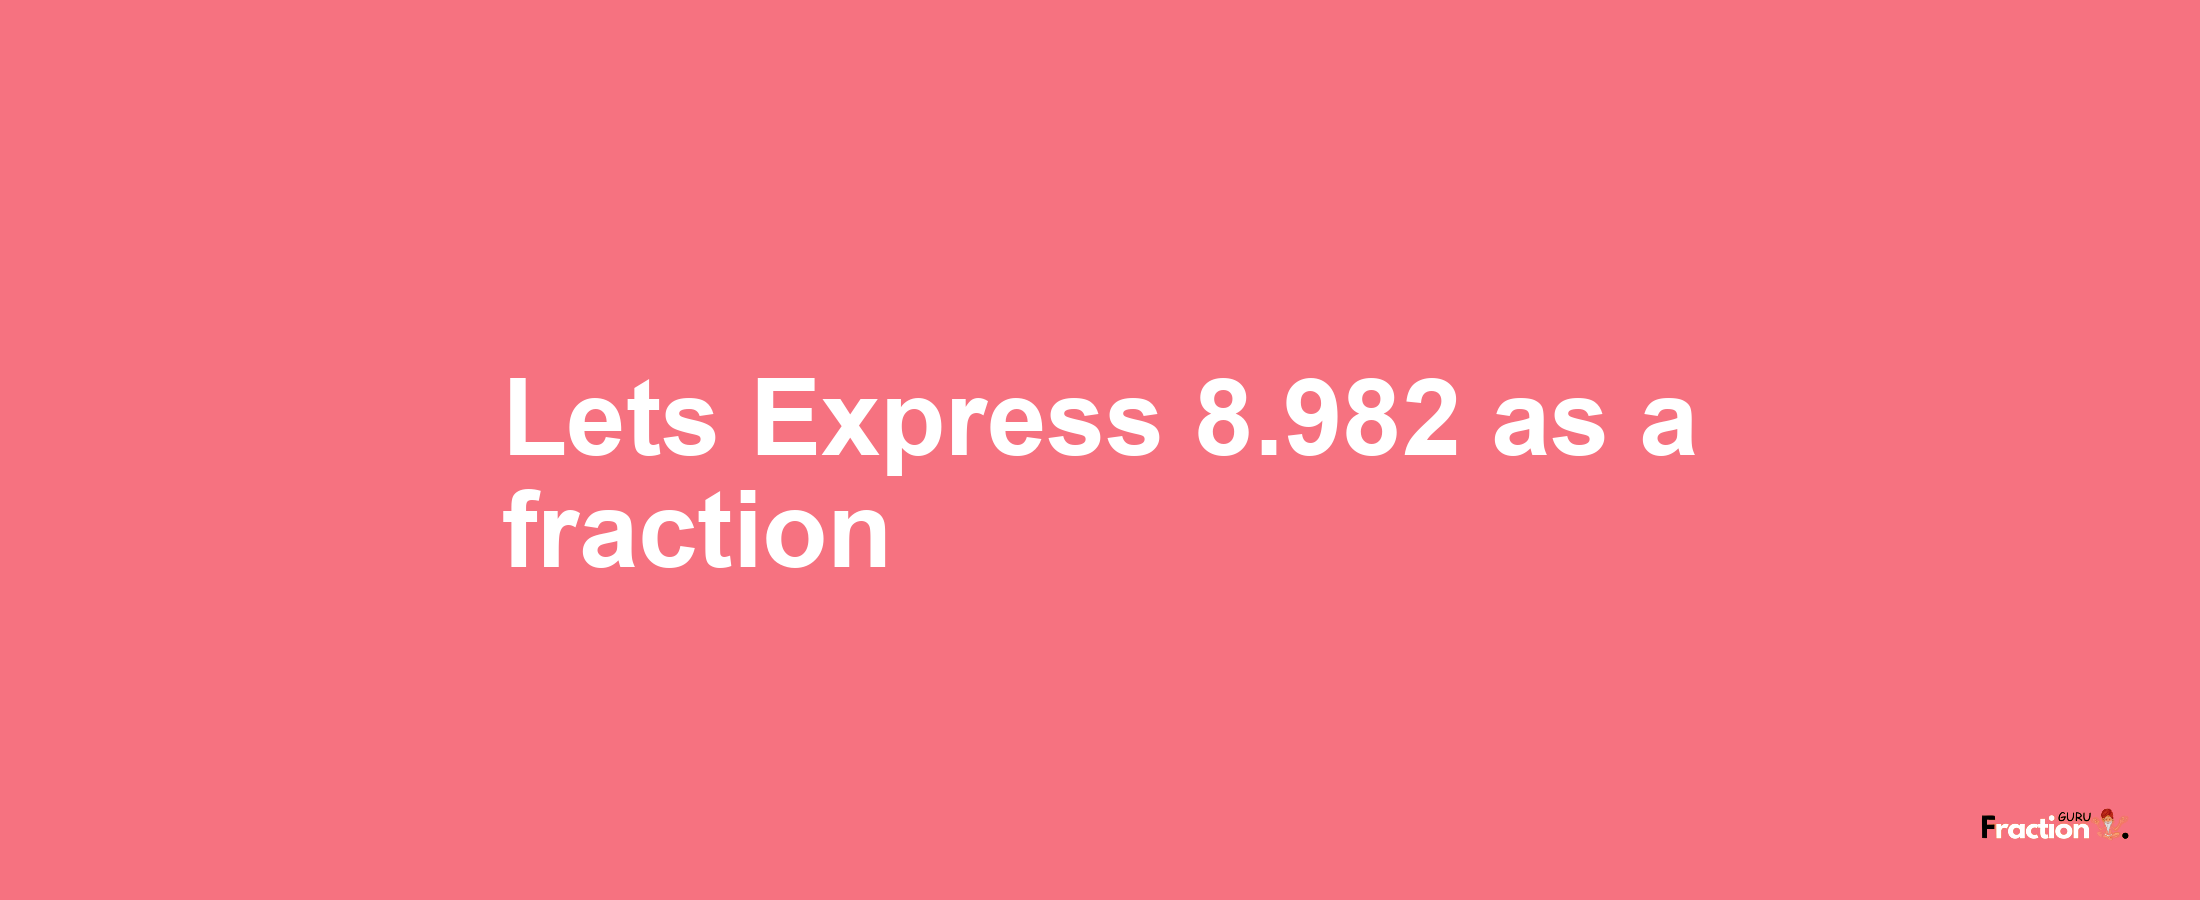 Lets Express 8.982 as afraction